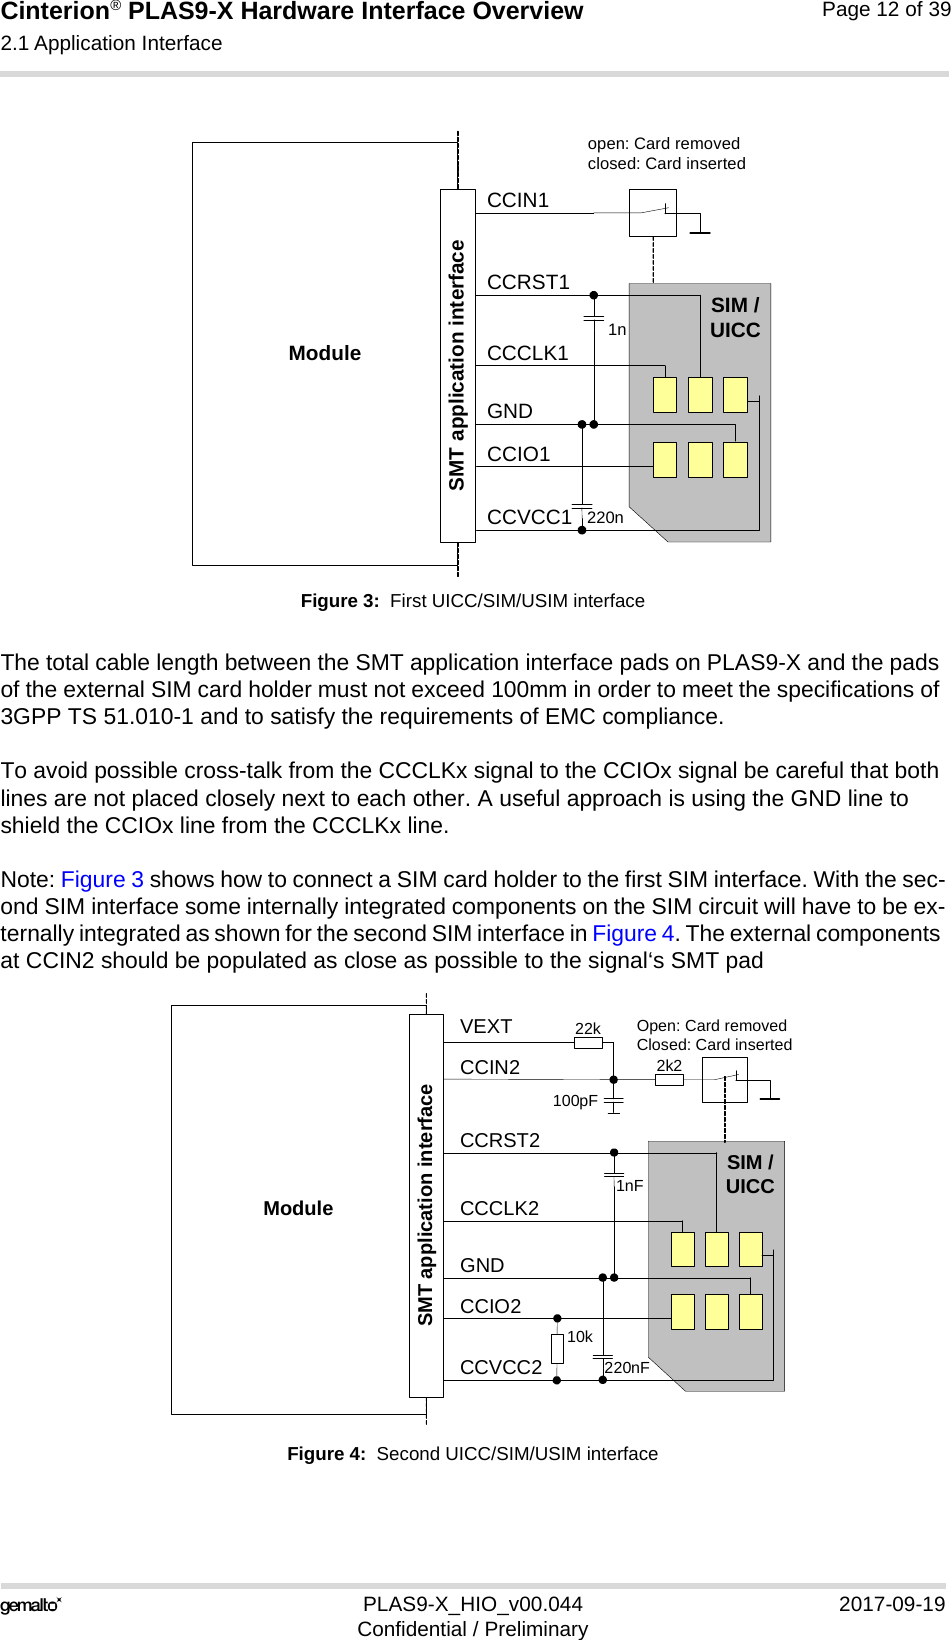 Cinterion® PLAS9-X Hardware Interface Overview2.1 Application Interface22PLAS9-X_HIO_v00.044 2017-09-19Confidential / PreliminaryPage 12 of 39Figure 3:  First UICC/SIM/USIM interfaceThe total cable length between the SMT application interface pads on PLAS9-X and the pads of the external SIM card holder must not exceed 100mm in order to meet the specifications of 3GPP TS 51.010-1 and to satisfy the requirements of EMC compliance.To avoid possible cross-talk from the CCCLKx signal to the CCIOx signal be careful that both lines are not placed closely next to each other. A useful approach is using the GND line to shield the CCIOx line from the CCCLKx line.Note: Figure 3 shows how to connect a SIM card holder to the first SIM interface. With the sec-ond SIM interface some internally integrated components on the SIM circuit will have to be ex-ternally integrated as shown for the second SIM interface in Figure 4. The external components at CCIN2 should be populated as close as possible to the signal‘s SMT padFigure 4:  Second UICC/SIM/USIM interfaceModuleopen: Card removedclosed: Card insertedCCRST1CCVCC1CCIO1CCCLK1CCIN1SIM /UICC1n220nSMT application interfaceGNDModuleOpen: Card removedClosed: Card insertedCCRST2CCVCC2CCIO2CCCLK2CCIN2SIM /UICC1nF220nFSMT application interfaceGNDVEXT100pF22k2k210k